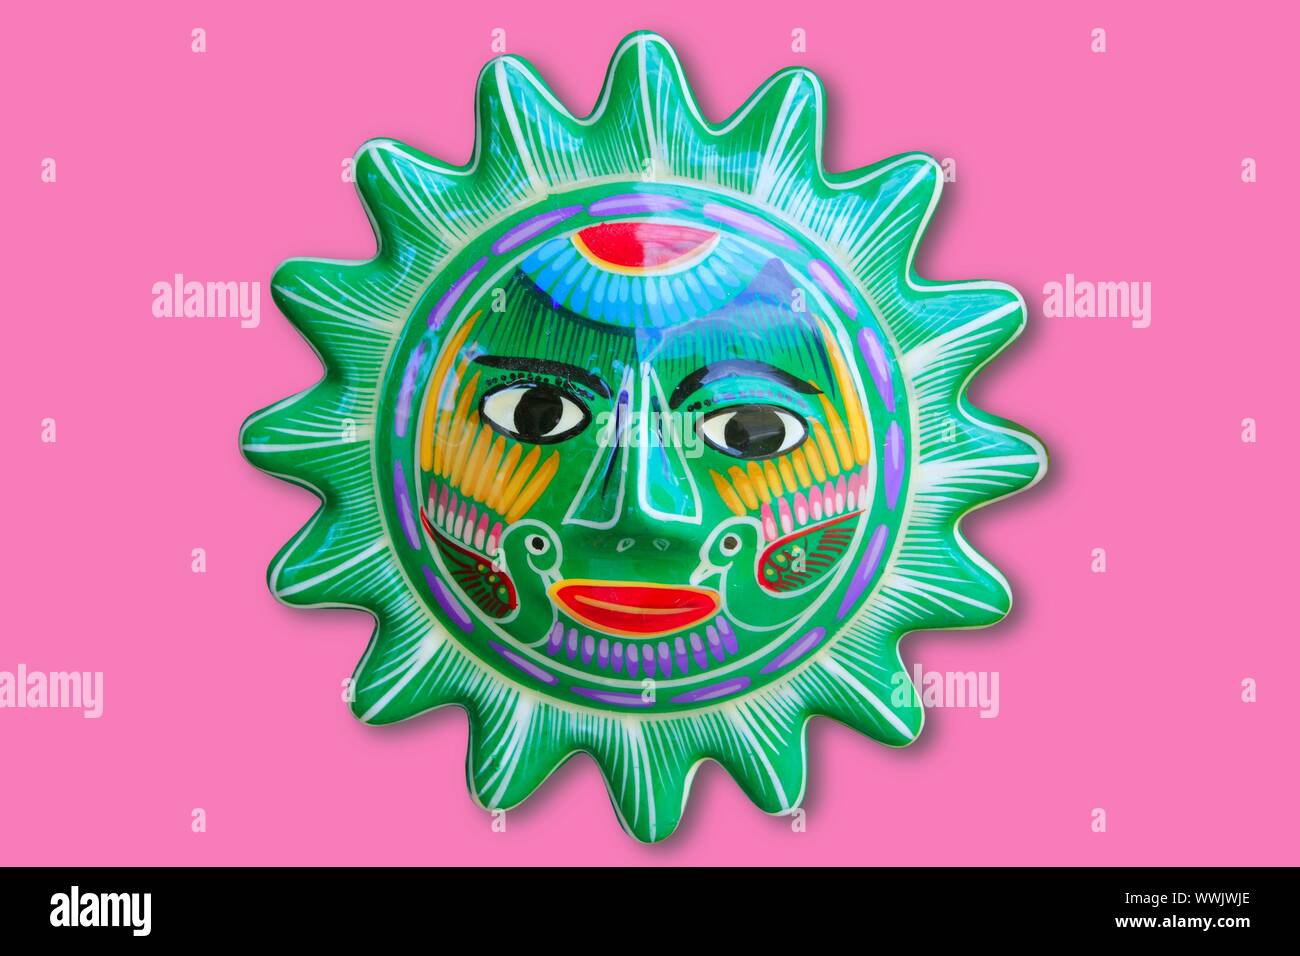 Mexican indian sun handcraft ceramic isolated in pink background Stock Photo